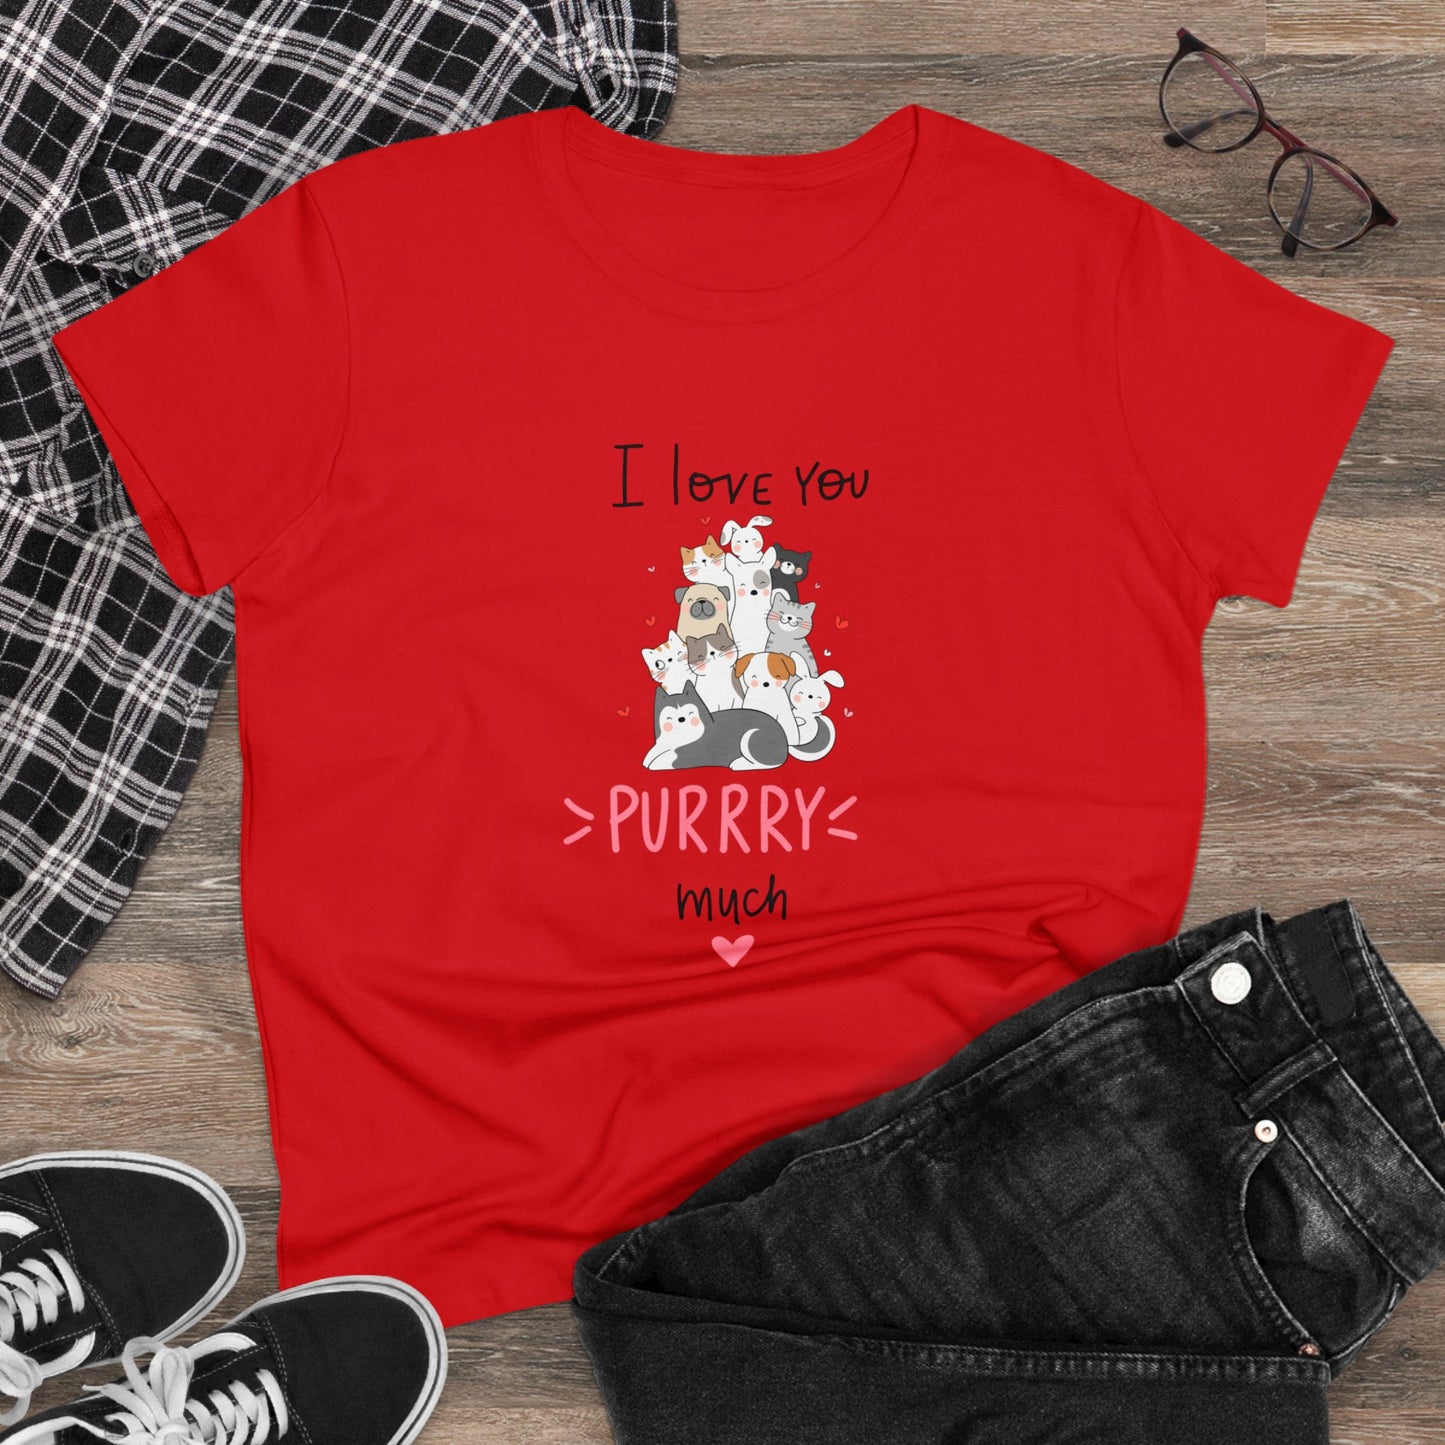 Adorable Animals that Love You Purry Much. Women's Midweight Cotton Tee